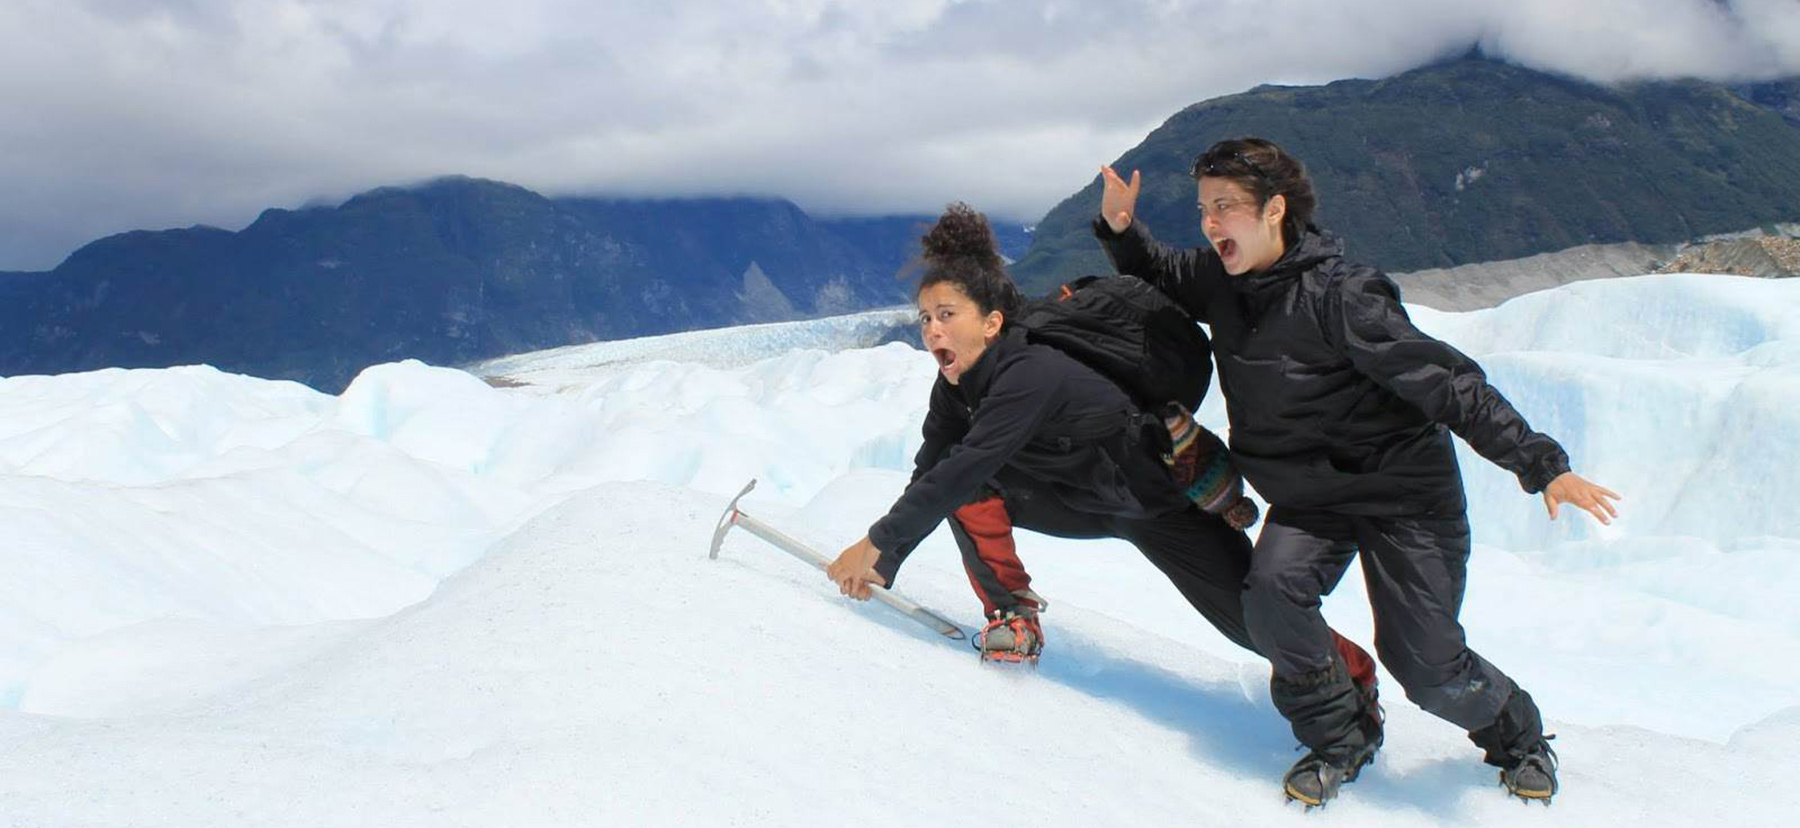 Two students climbing a snow-covered mountain and mugging for the camera